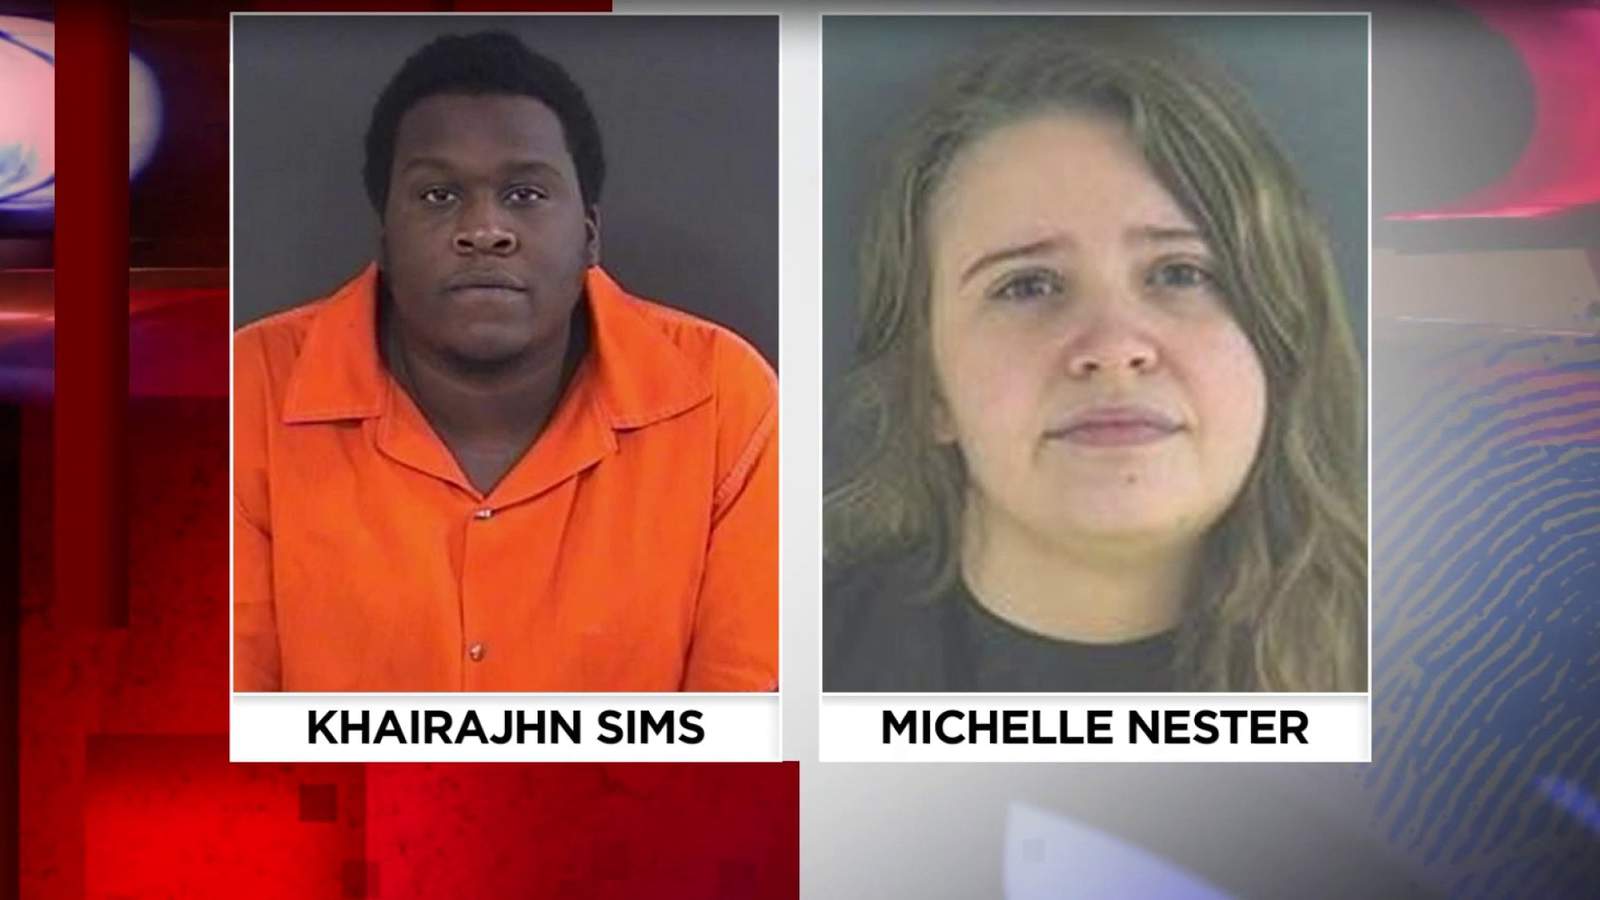 Two facing charges in connection with abduction, robbery spanning Roanoke, Bedford counties